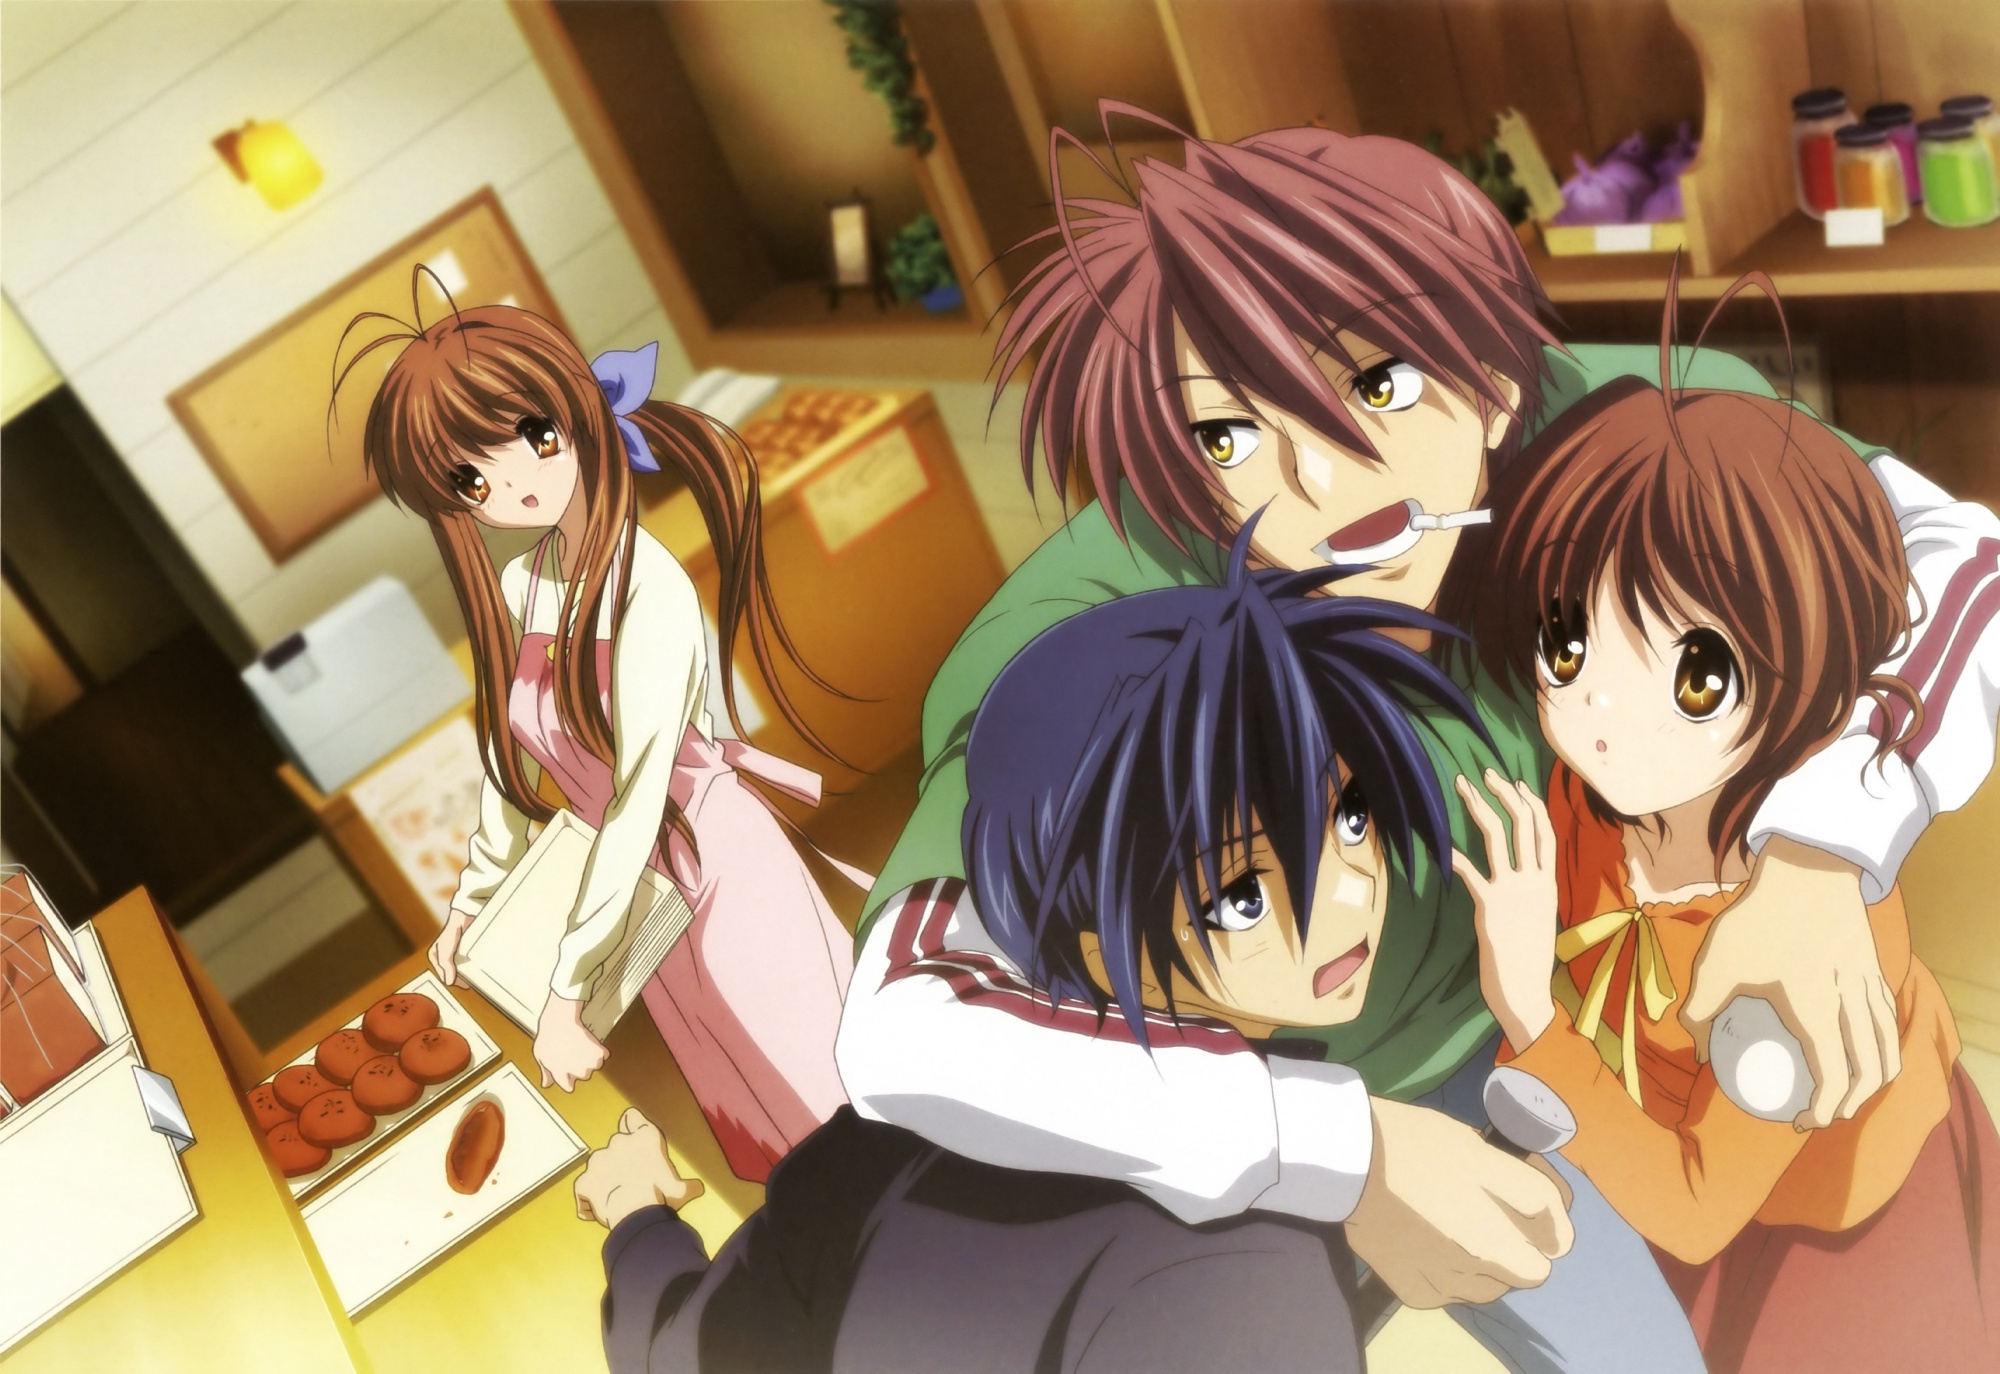 Anime Like Clannad / After story is often cited as one of the greatest roma...